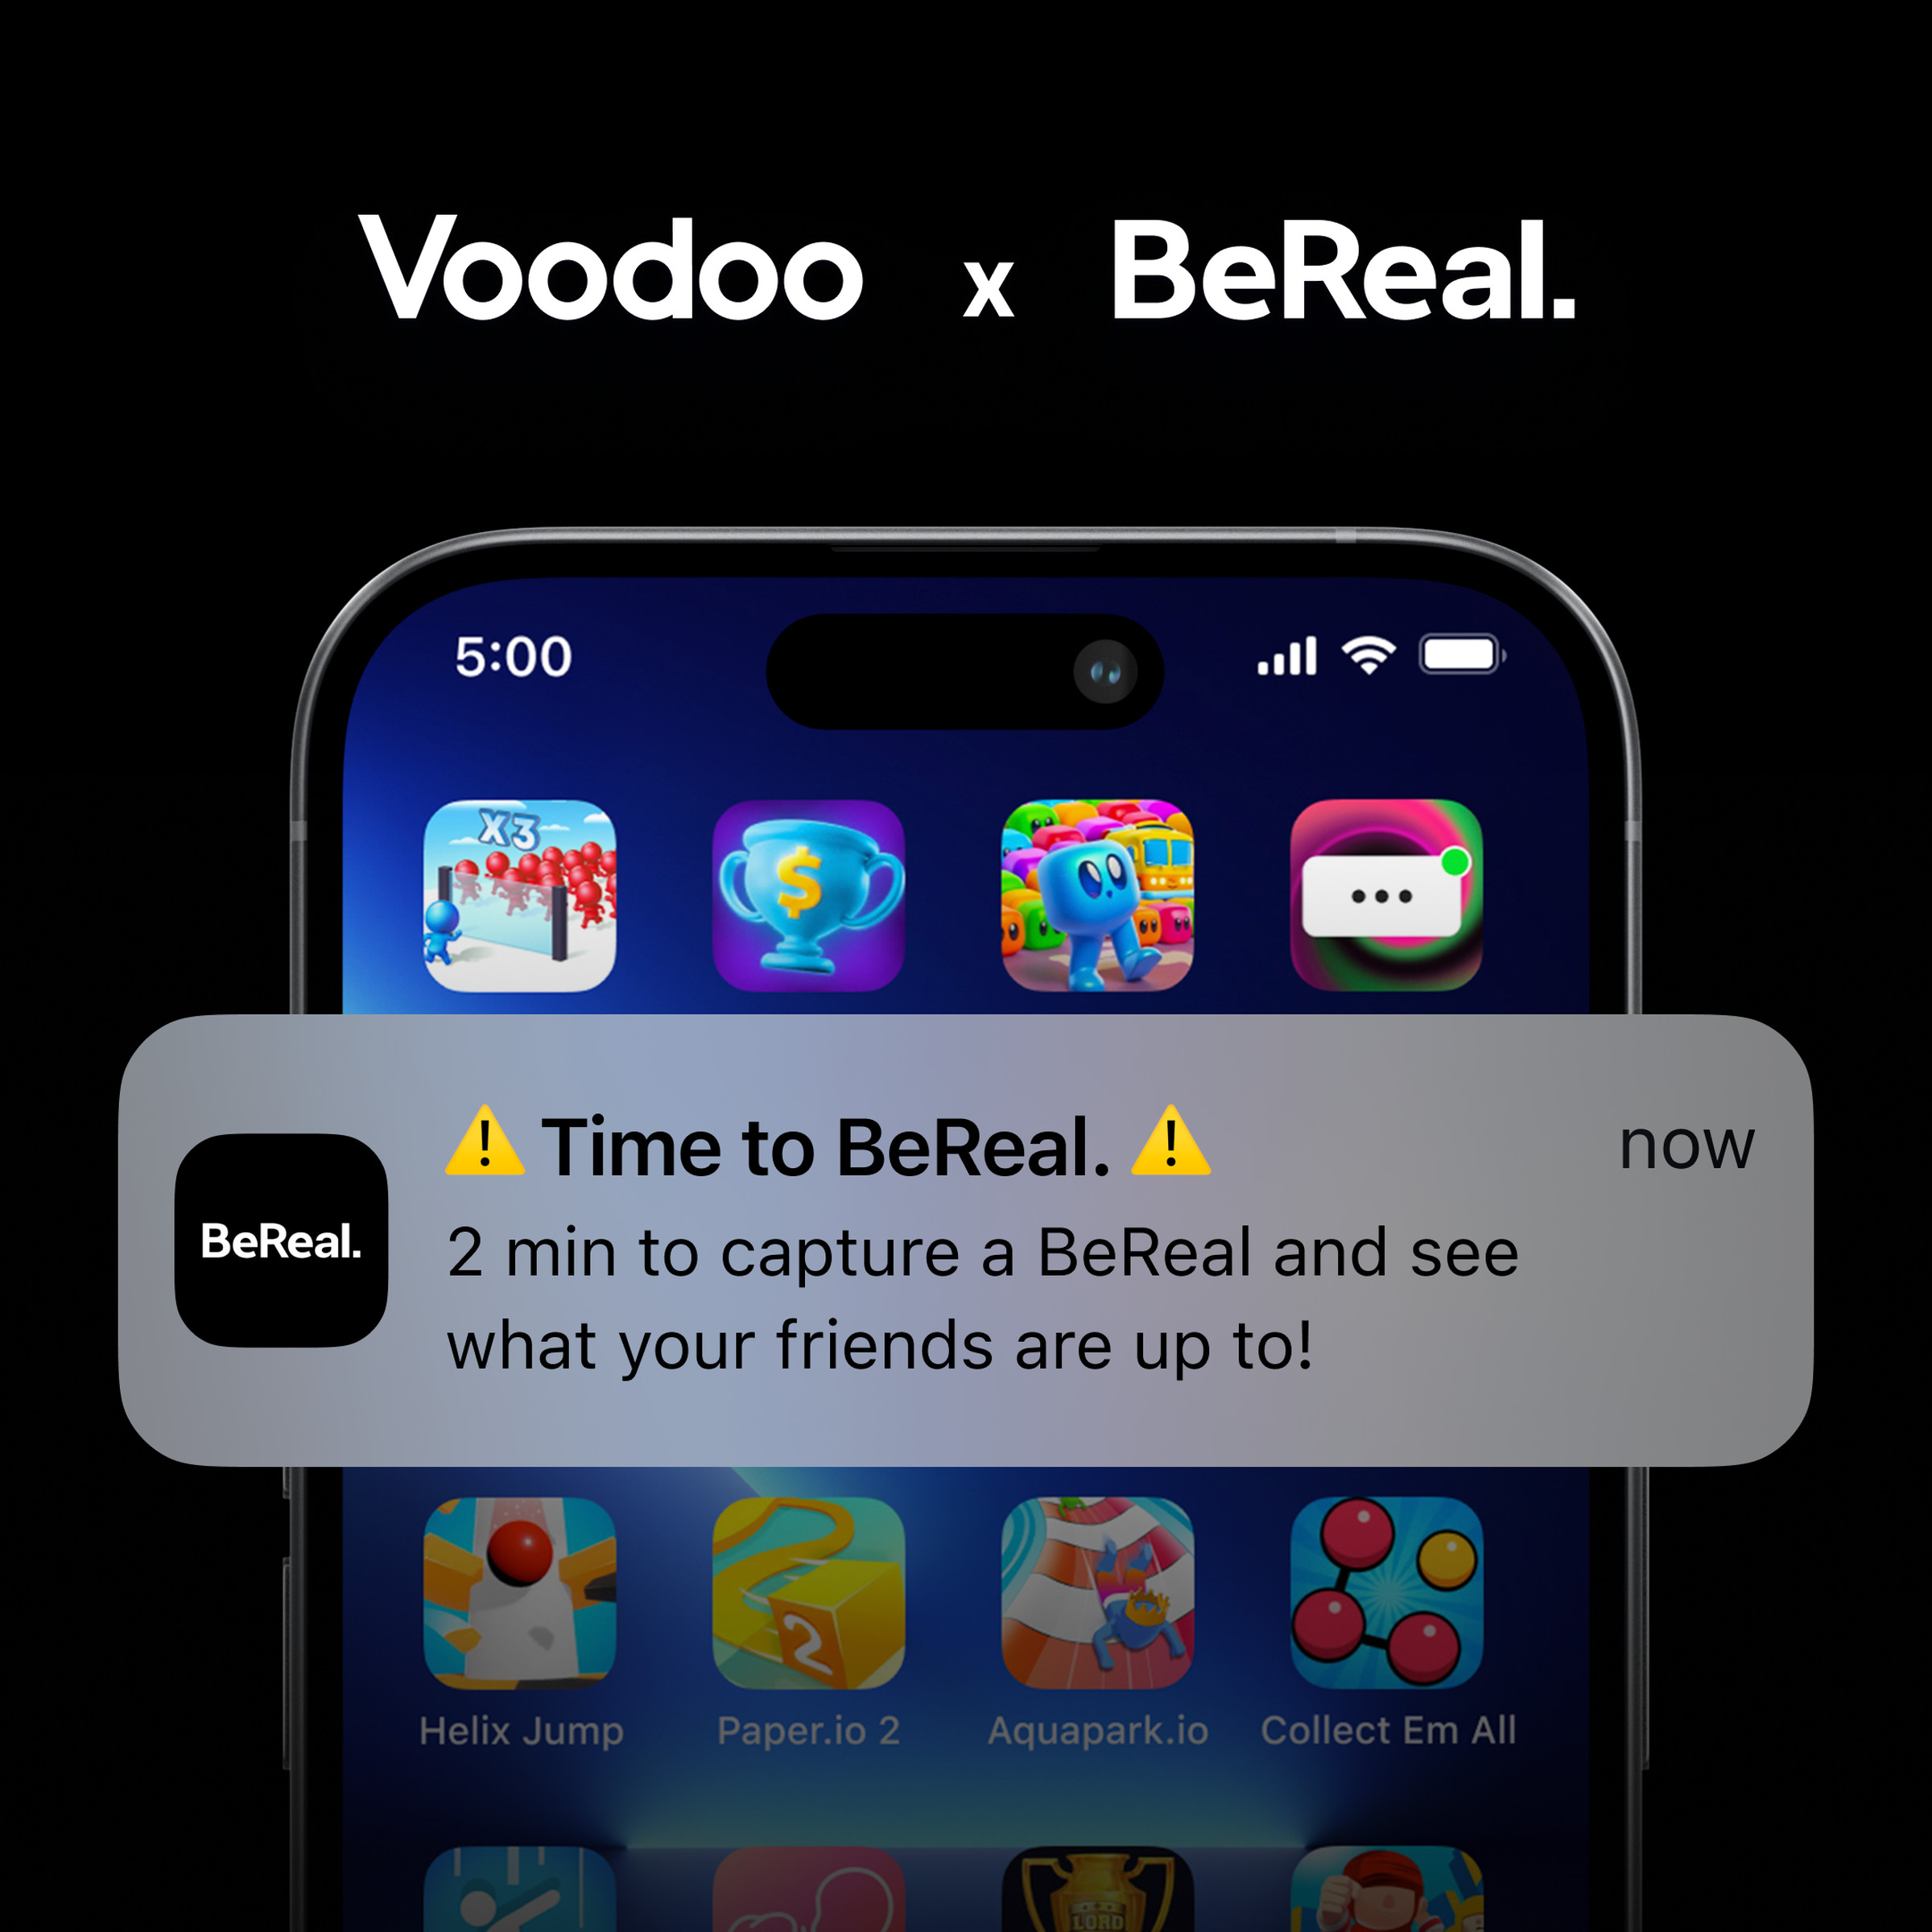 An image showing a BeReal notification on a mobile device